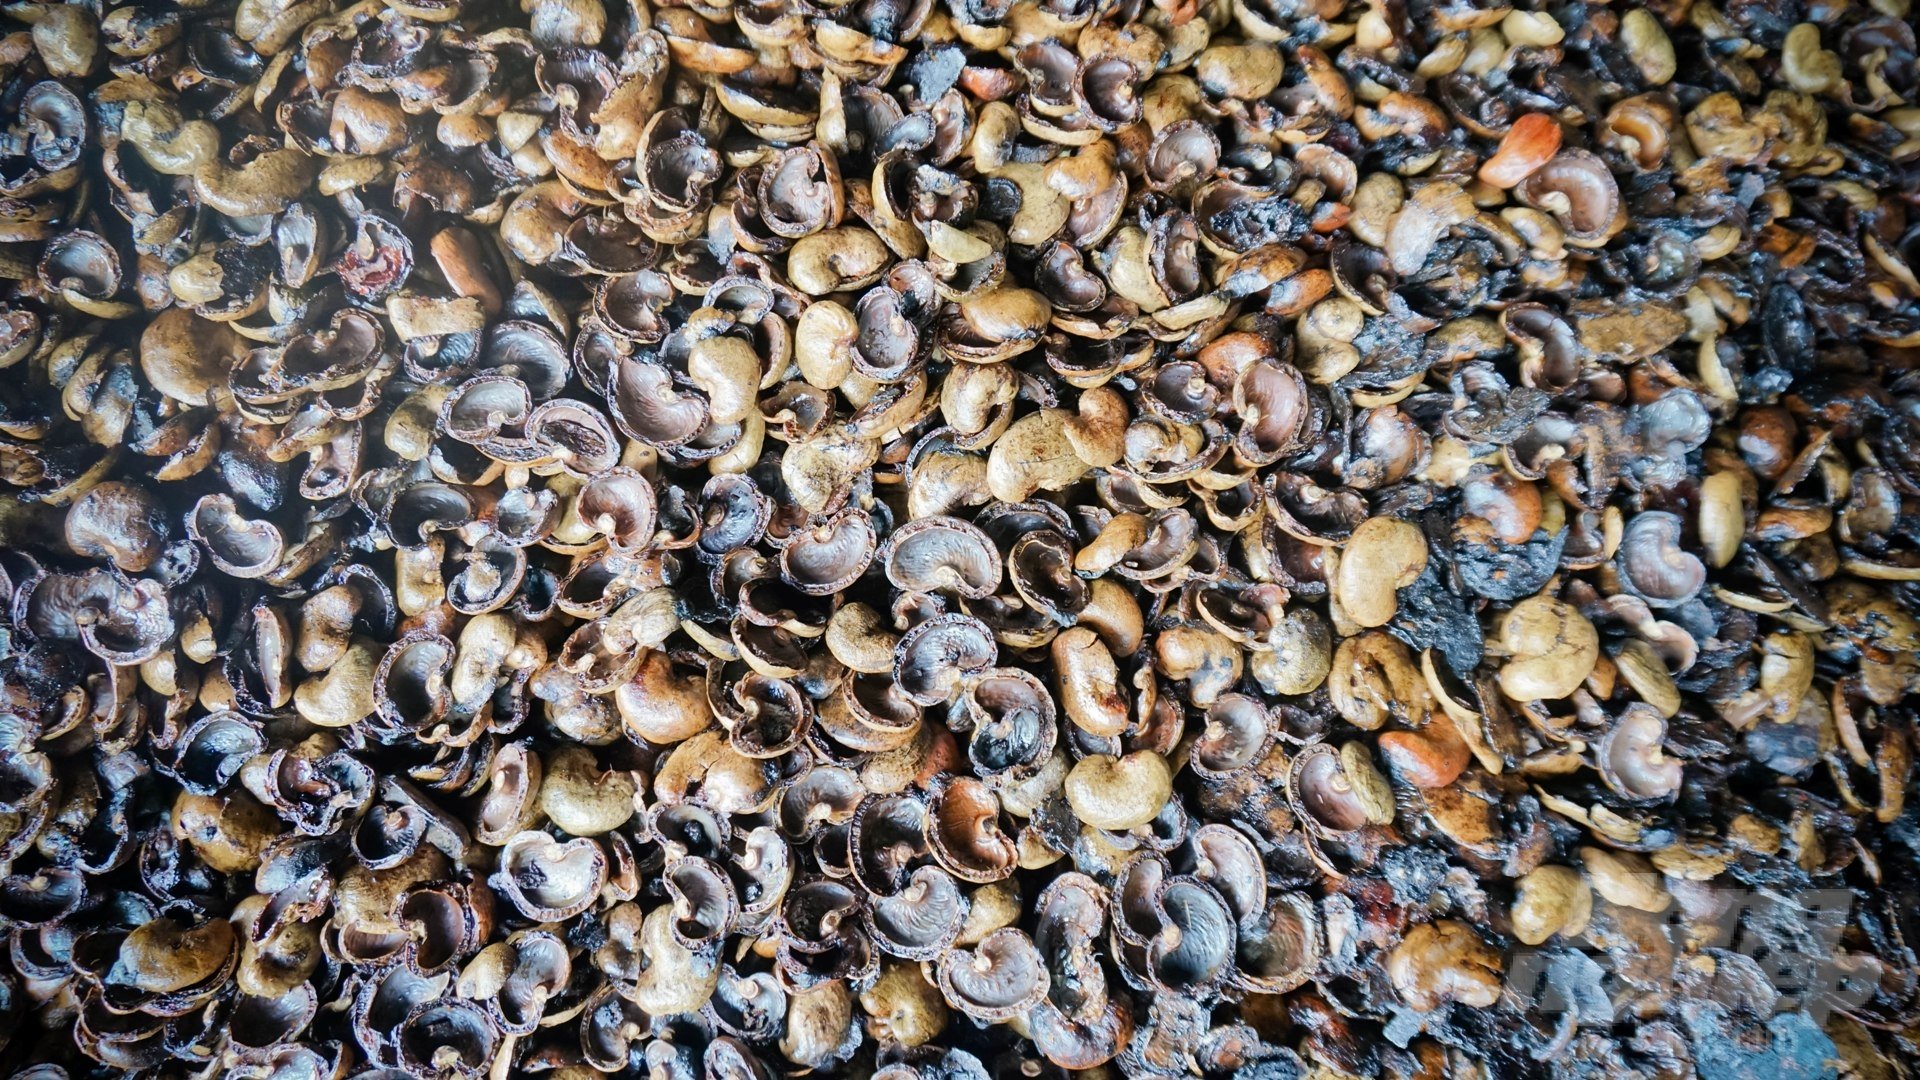 In addition to processing into cashew oil, the shell can also be used to make fuel, and chipboard. Photo: Le Binh.